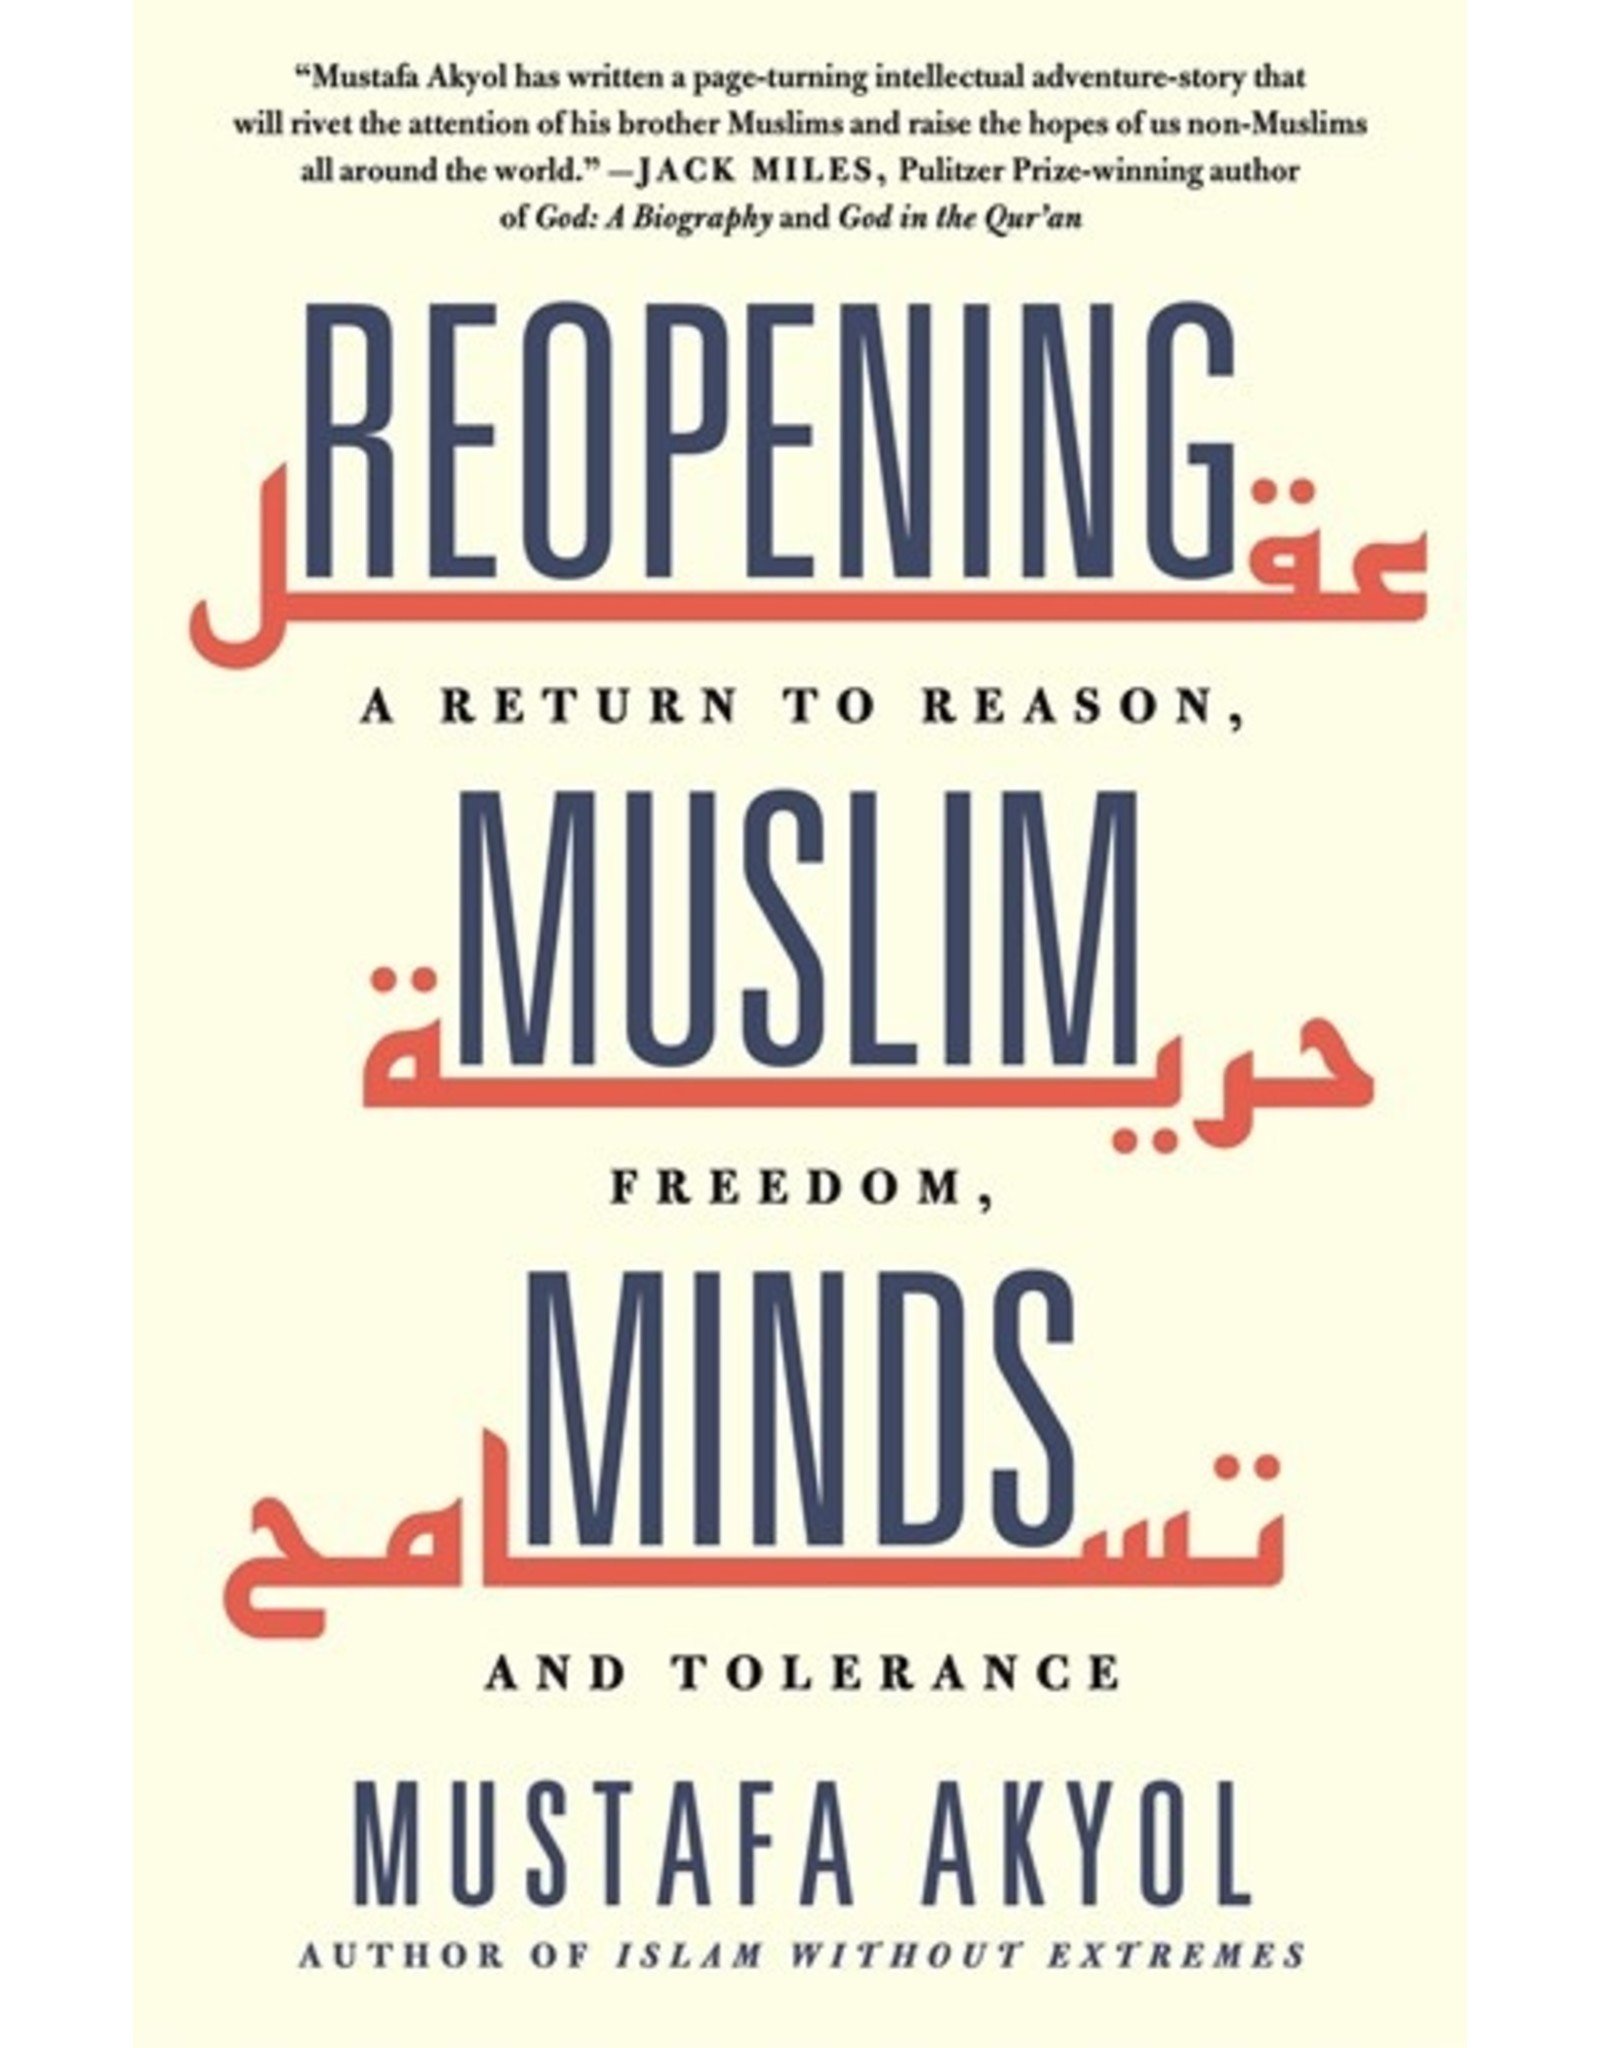 Books Reopening Muslim Minds: A Return to Reason, Freedom, and Tolerance by Mustafa Akyol